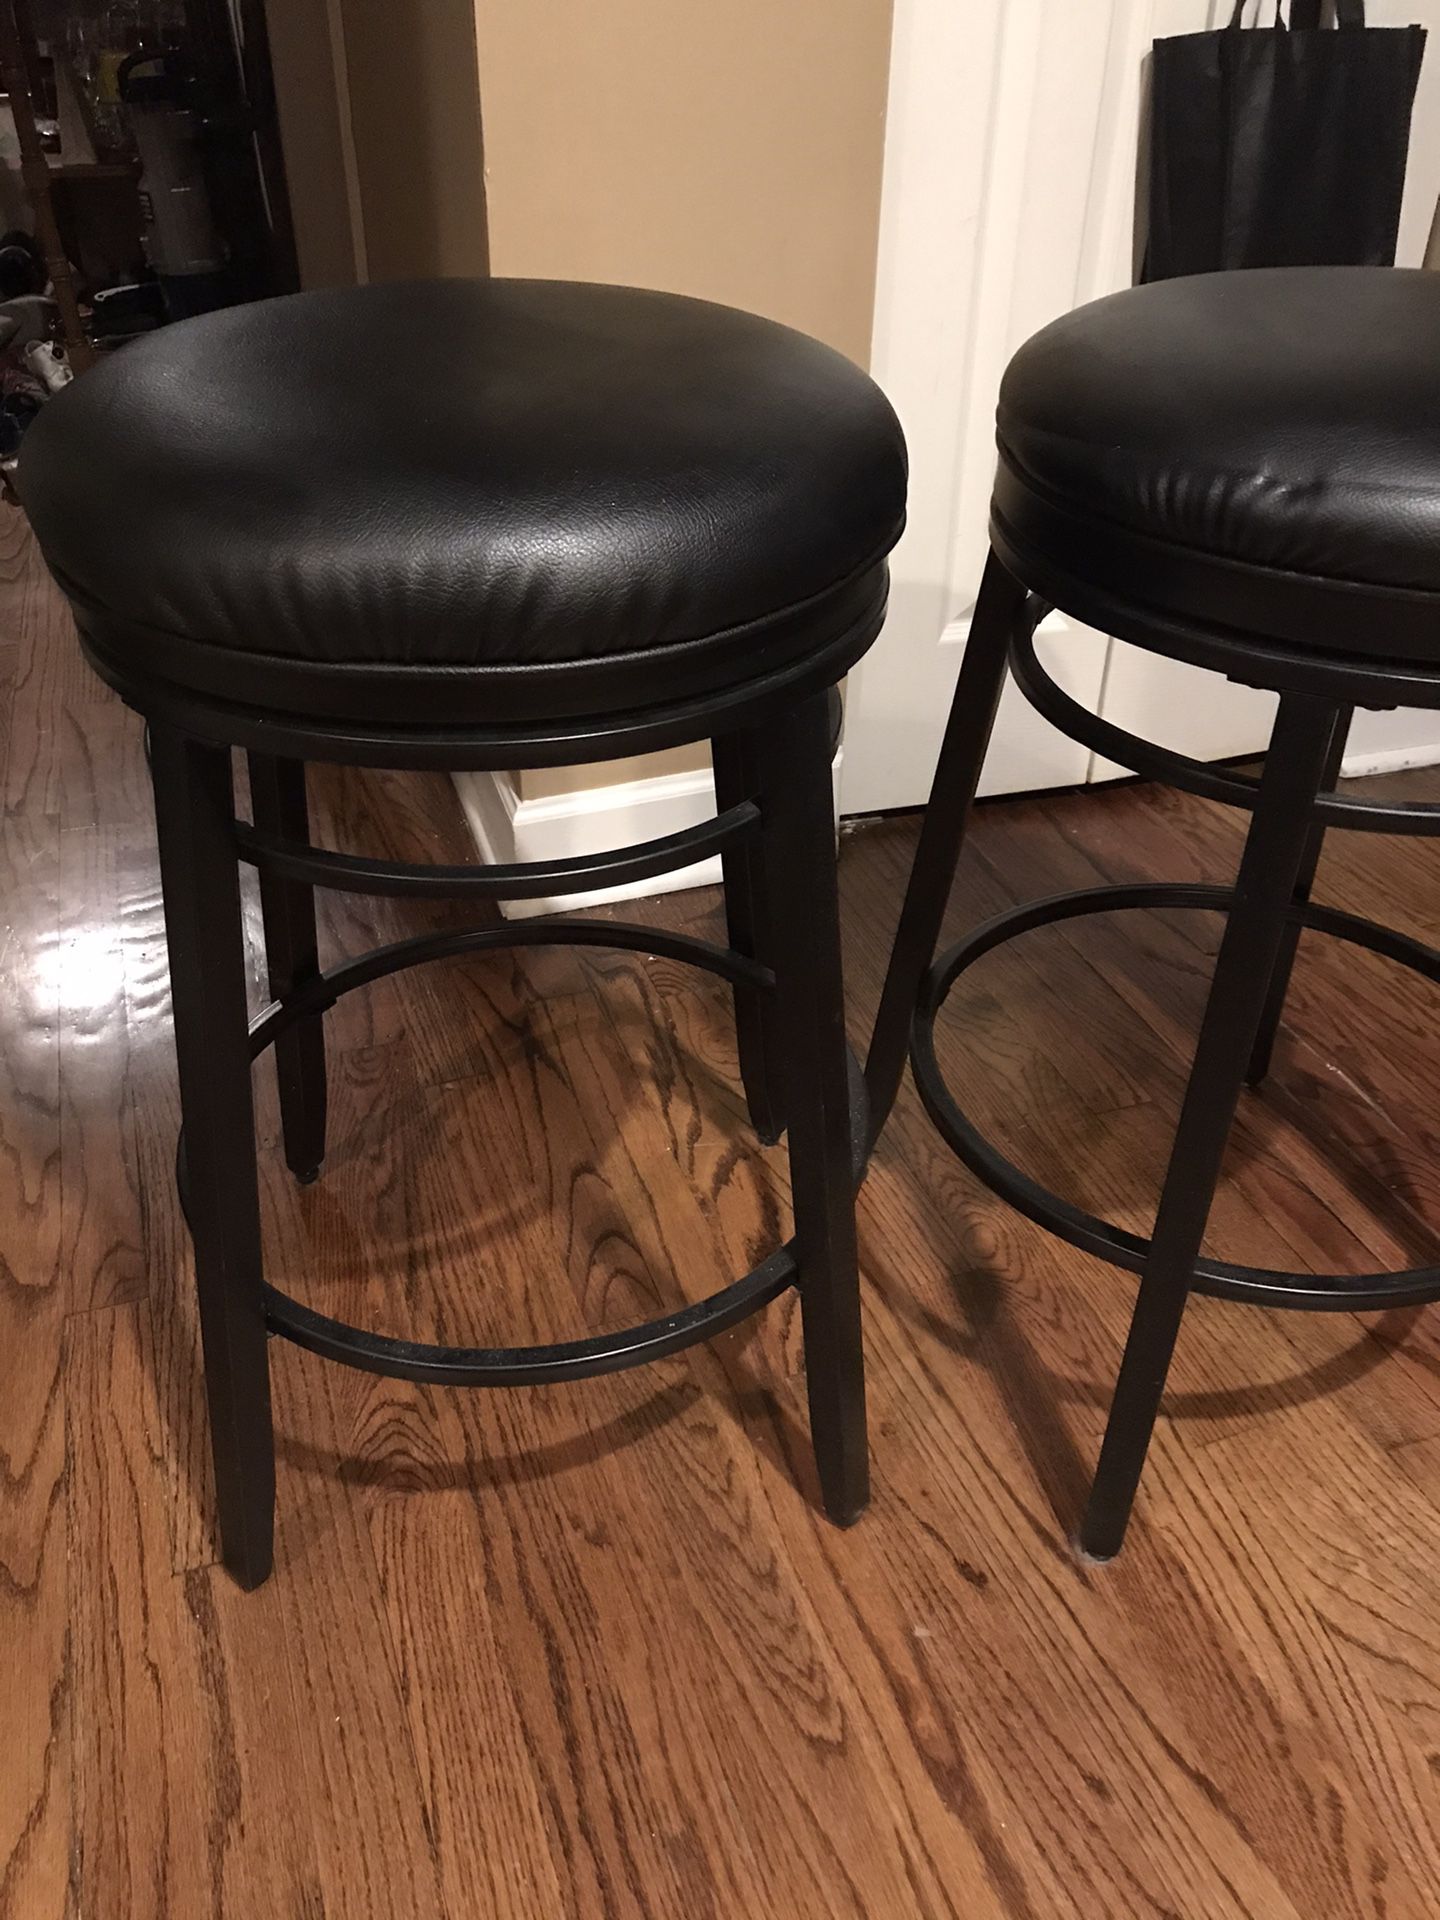 Barely used Stools